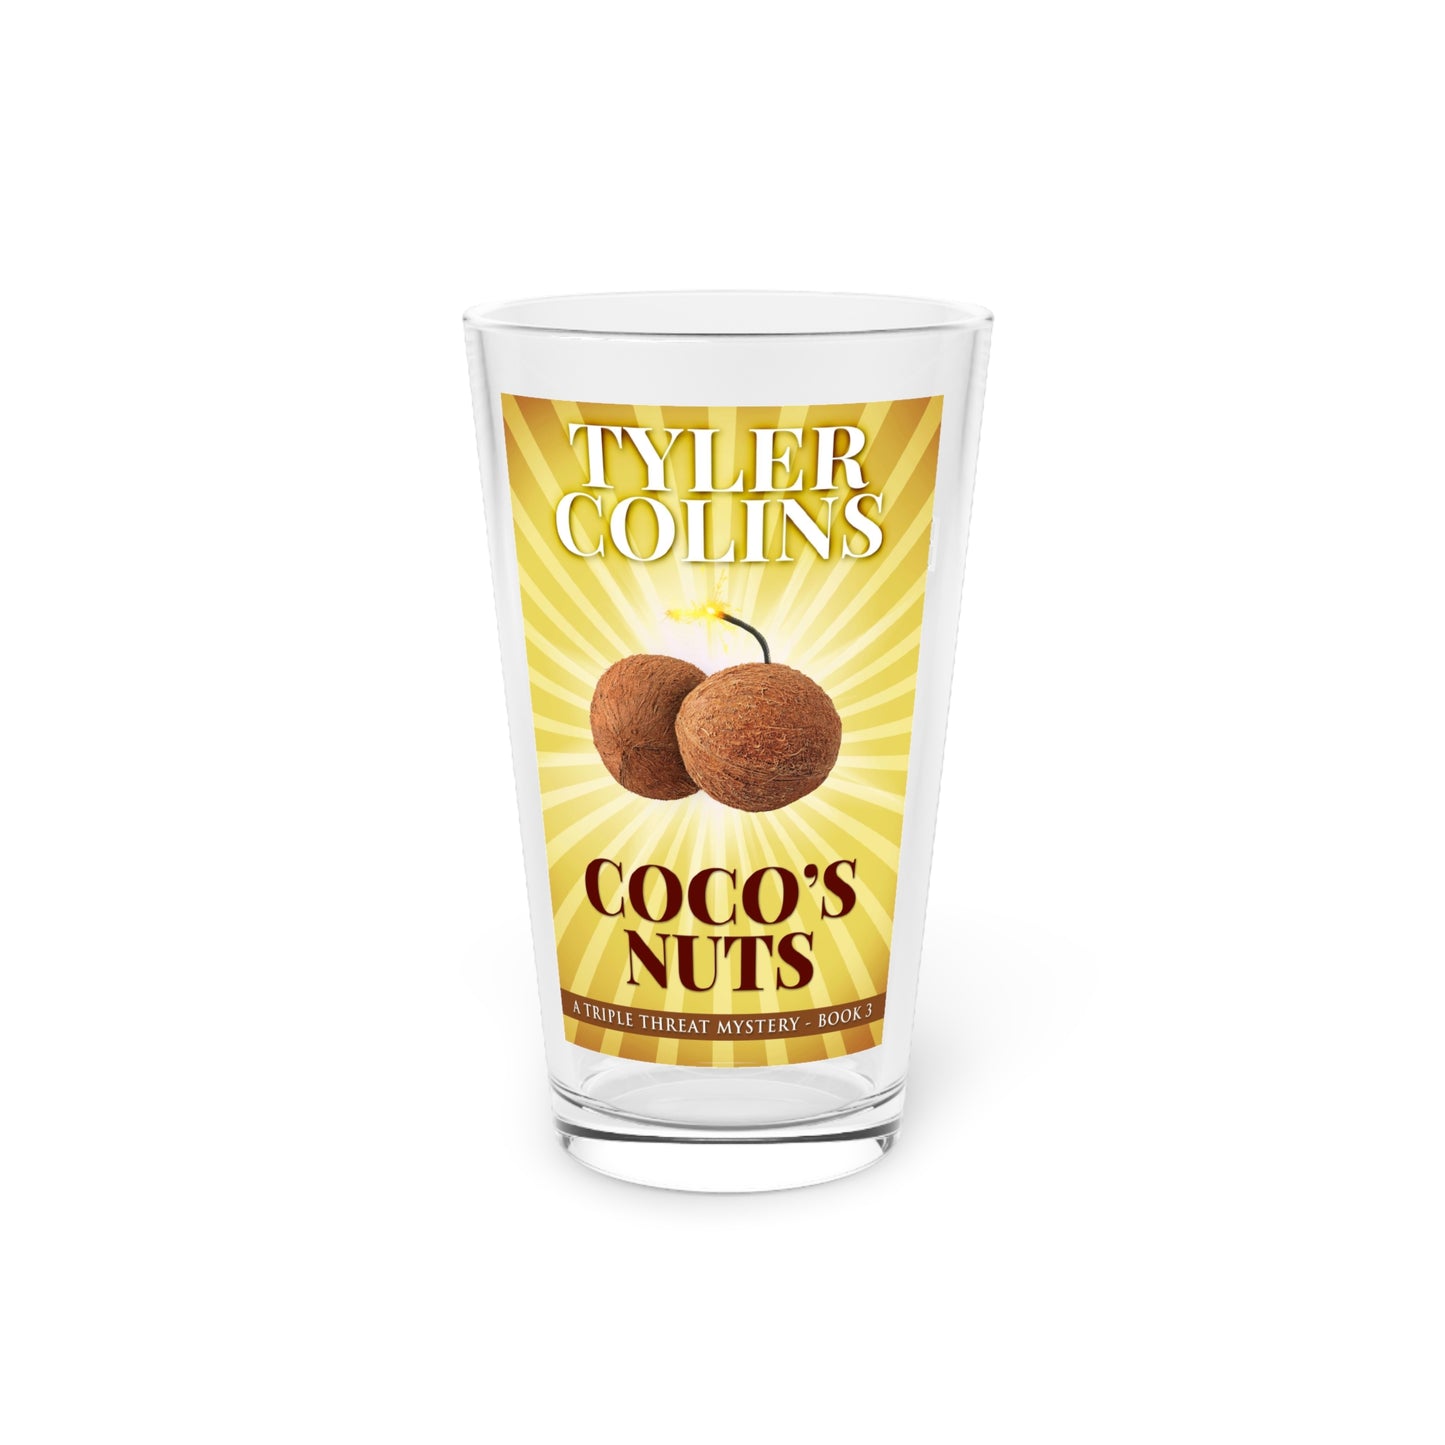 Coco's Nuts - Pint Glass